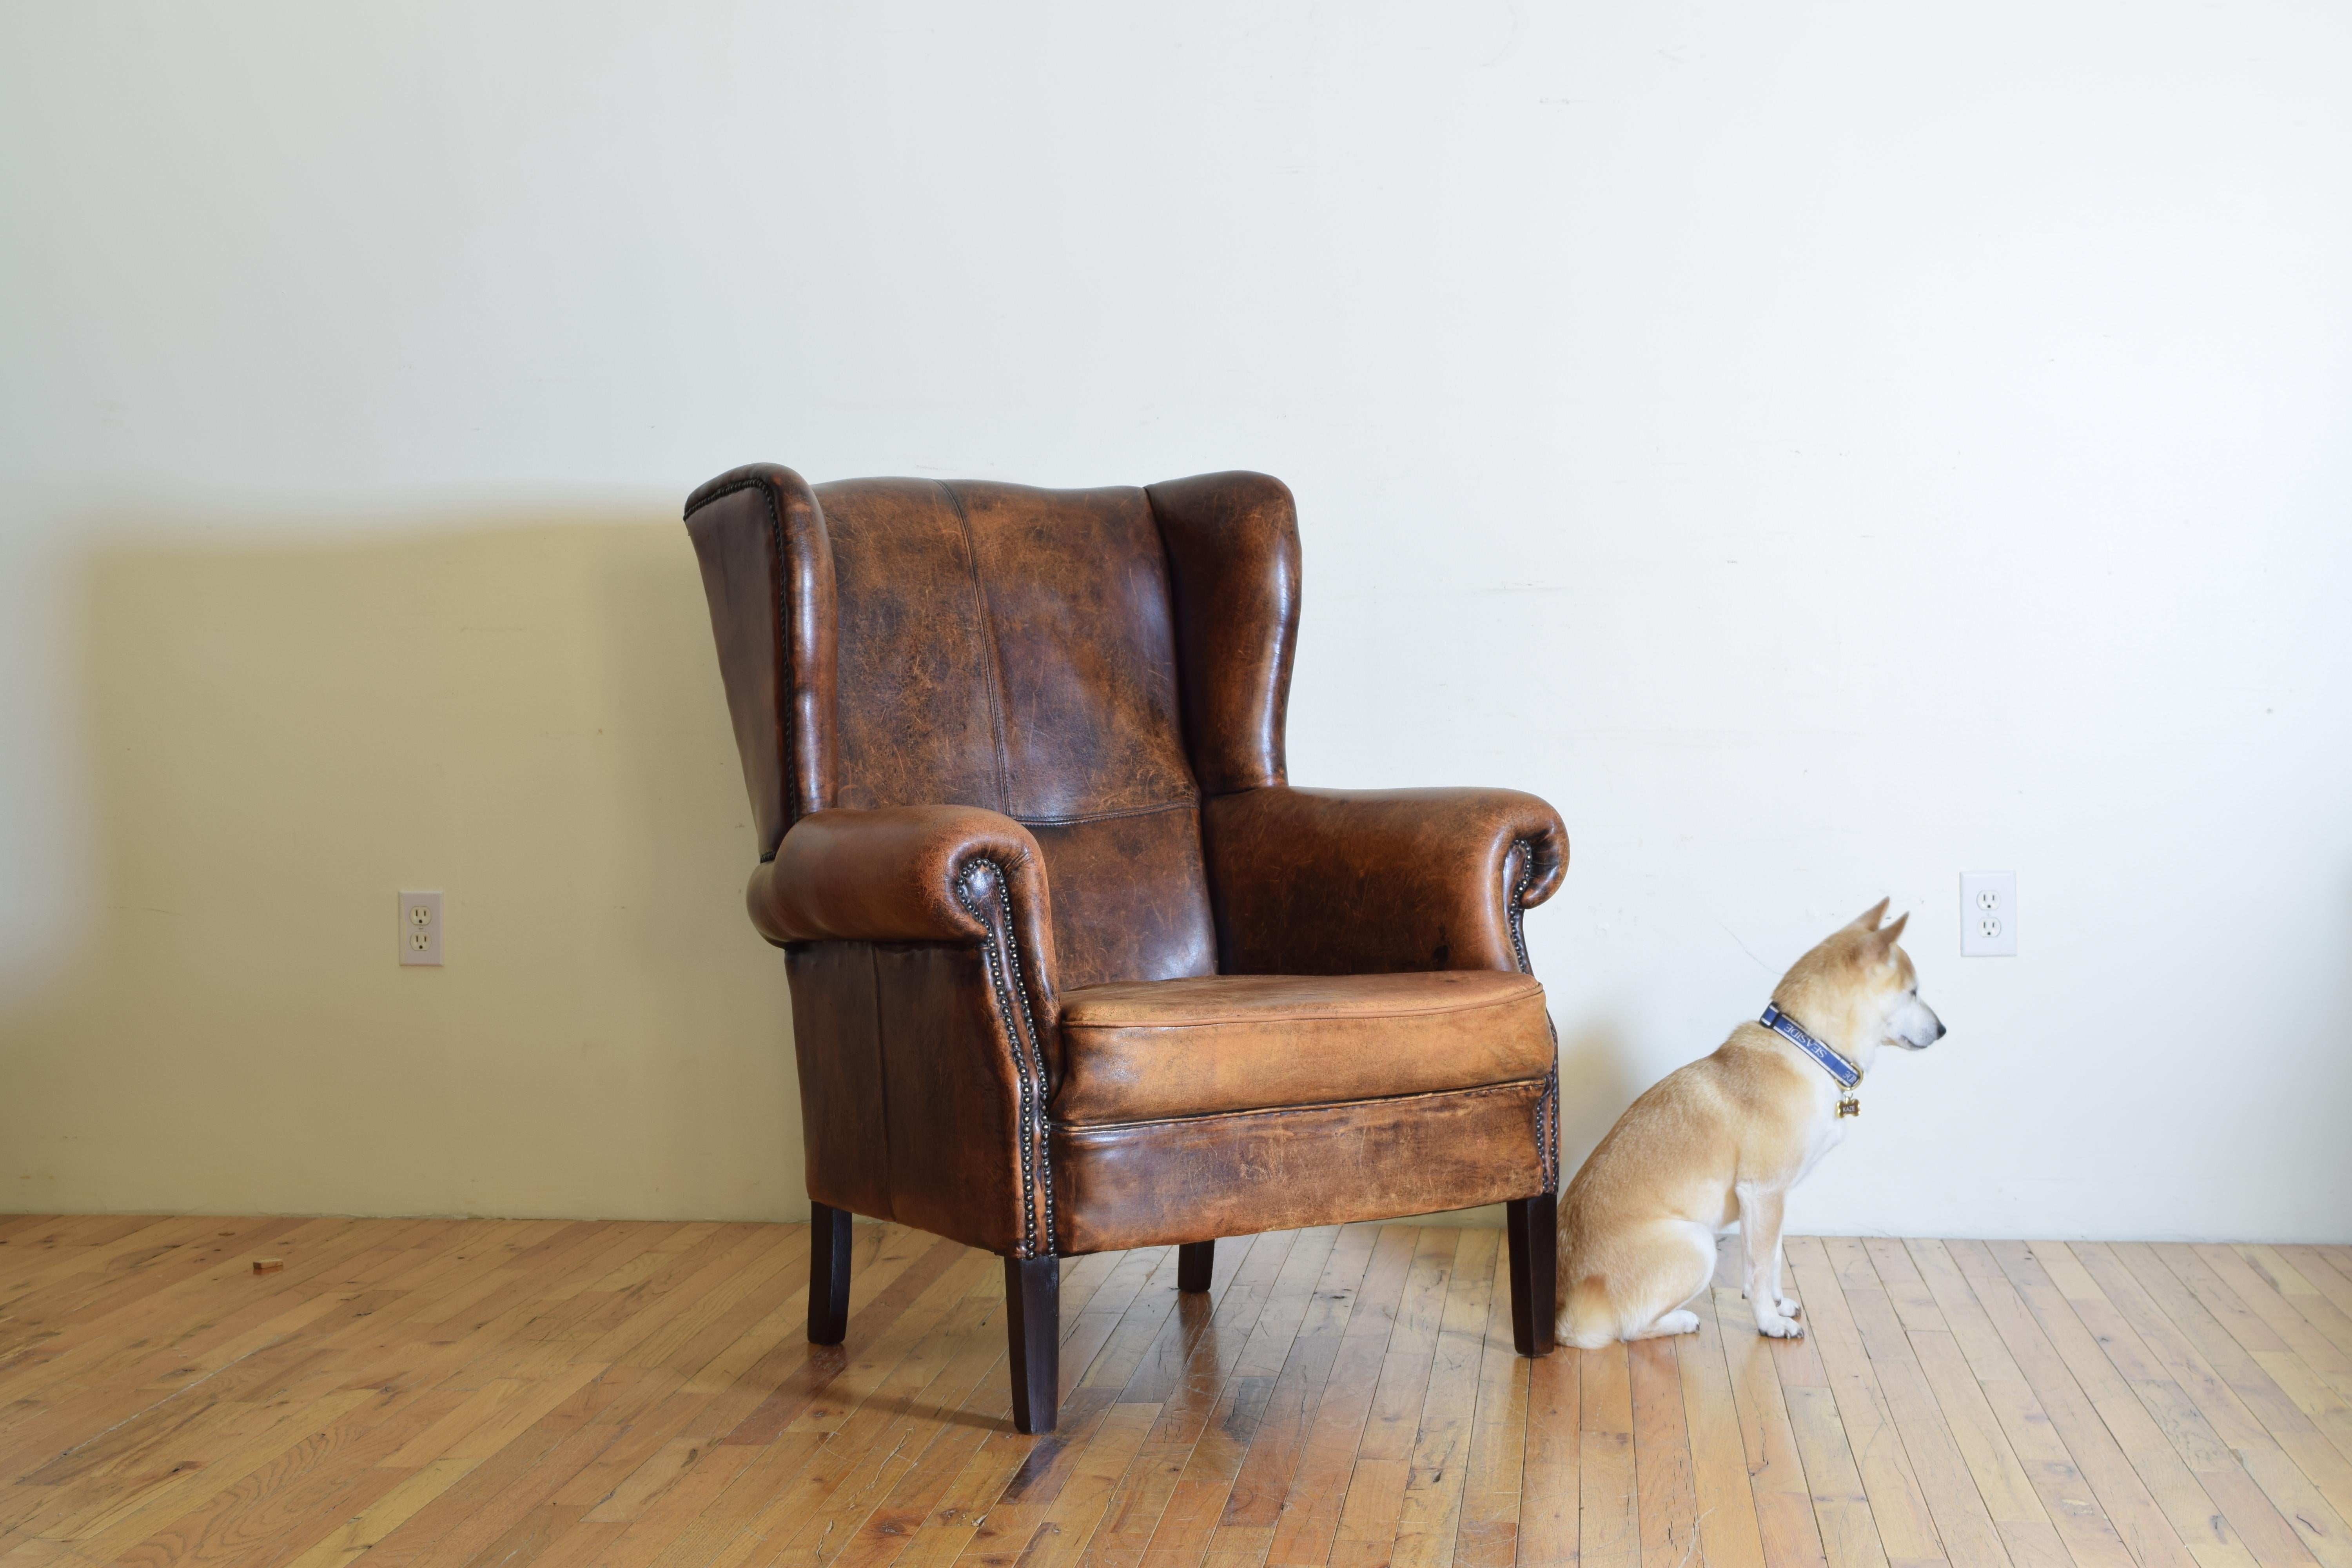 Having fitted seat, upholstered in sheepskin, trimmed in patinated brass nailheads, raised on tapering front legs, the rear legs slightly splayed, third quarter of the 20th century.